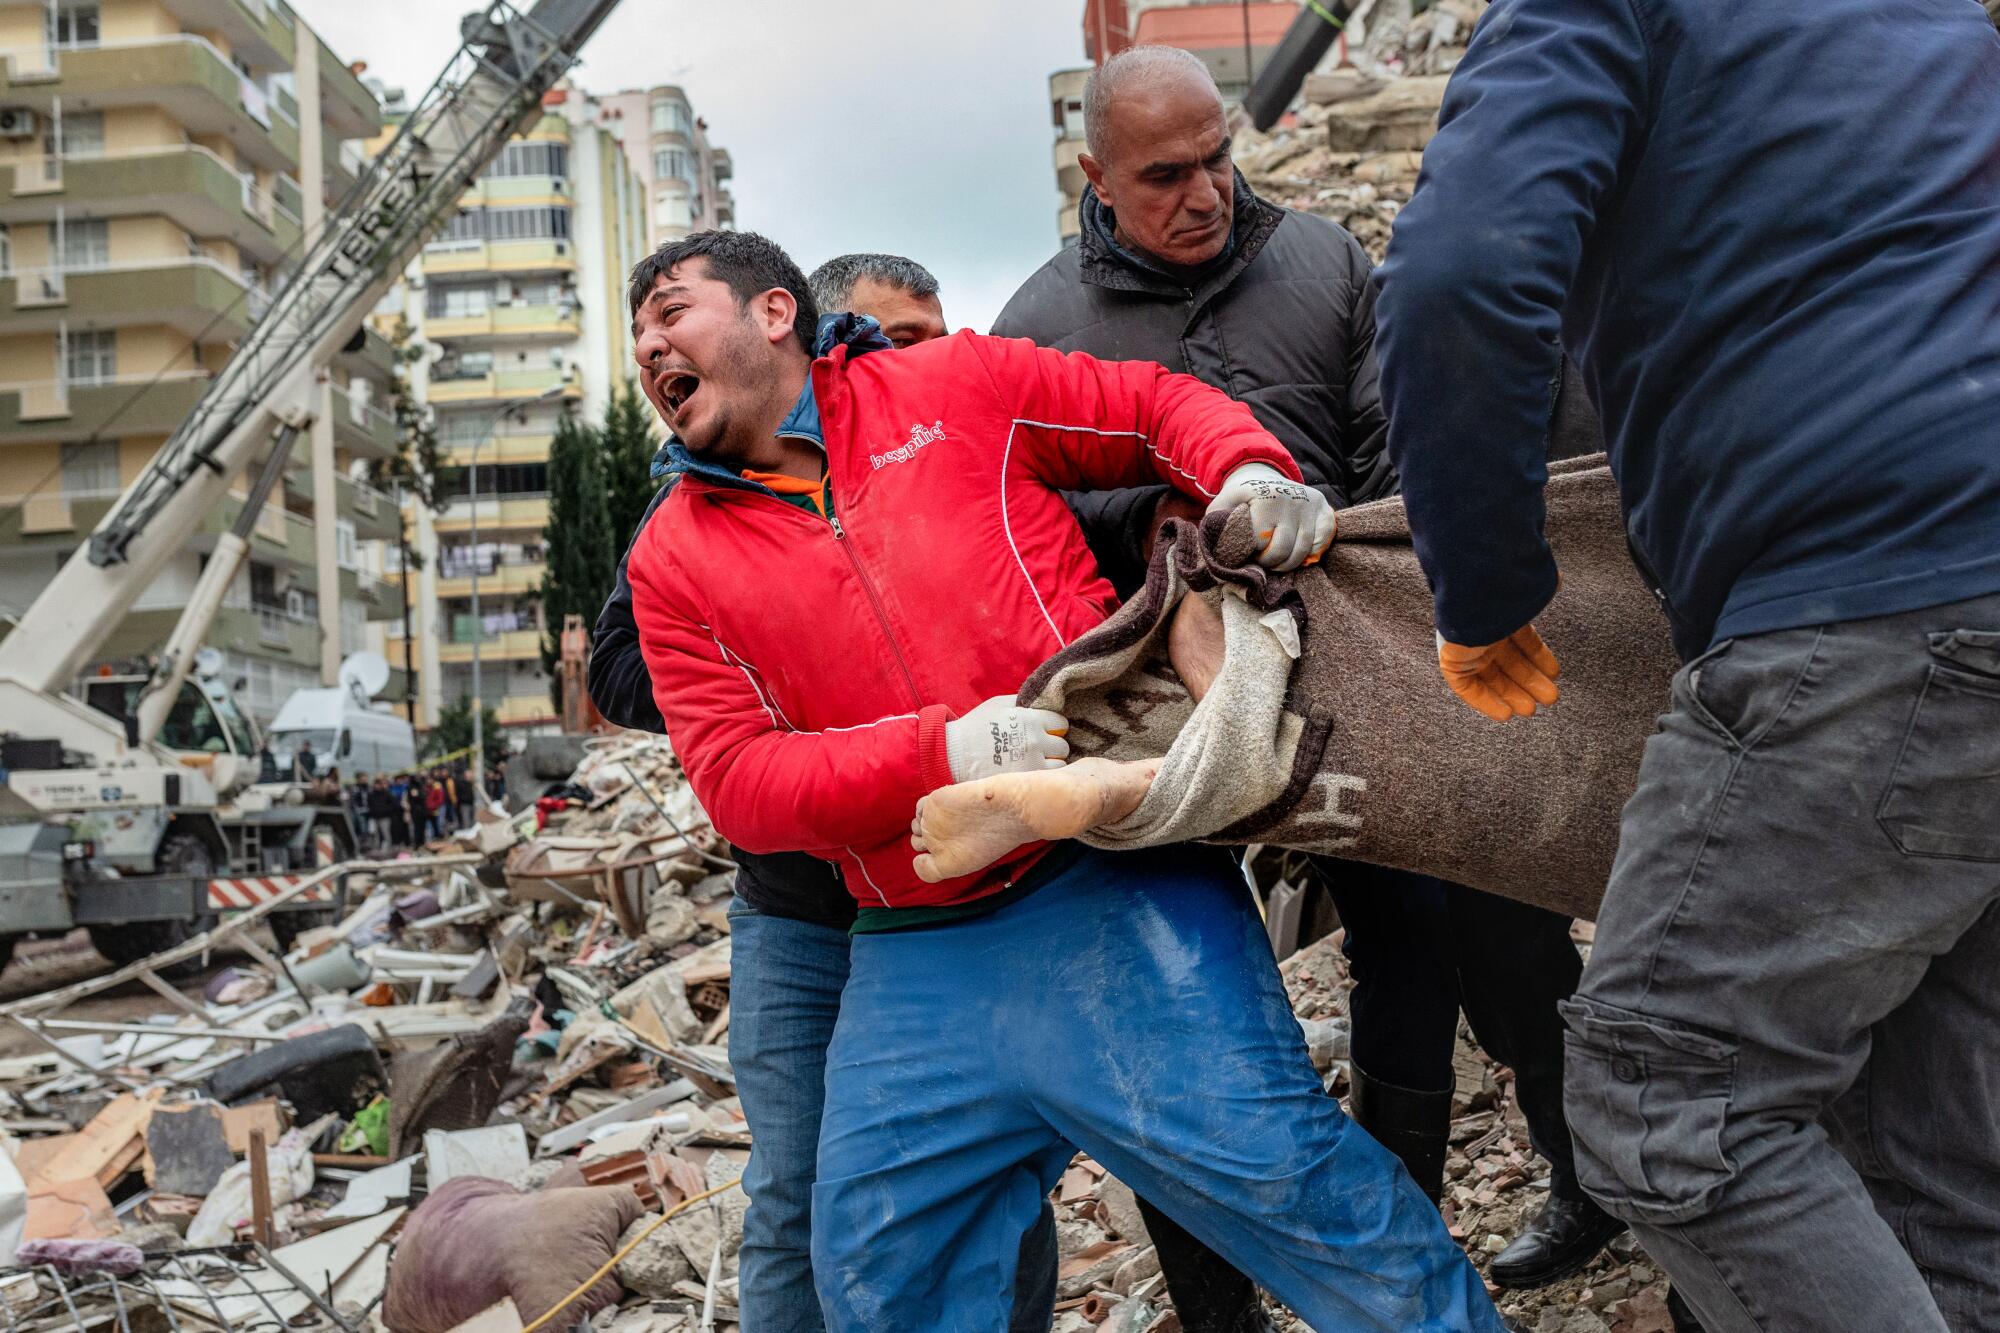 A rescuer cries out as he helps carry a bod wrapped in blanket, with a human foot sticking out.